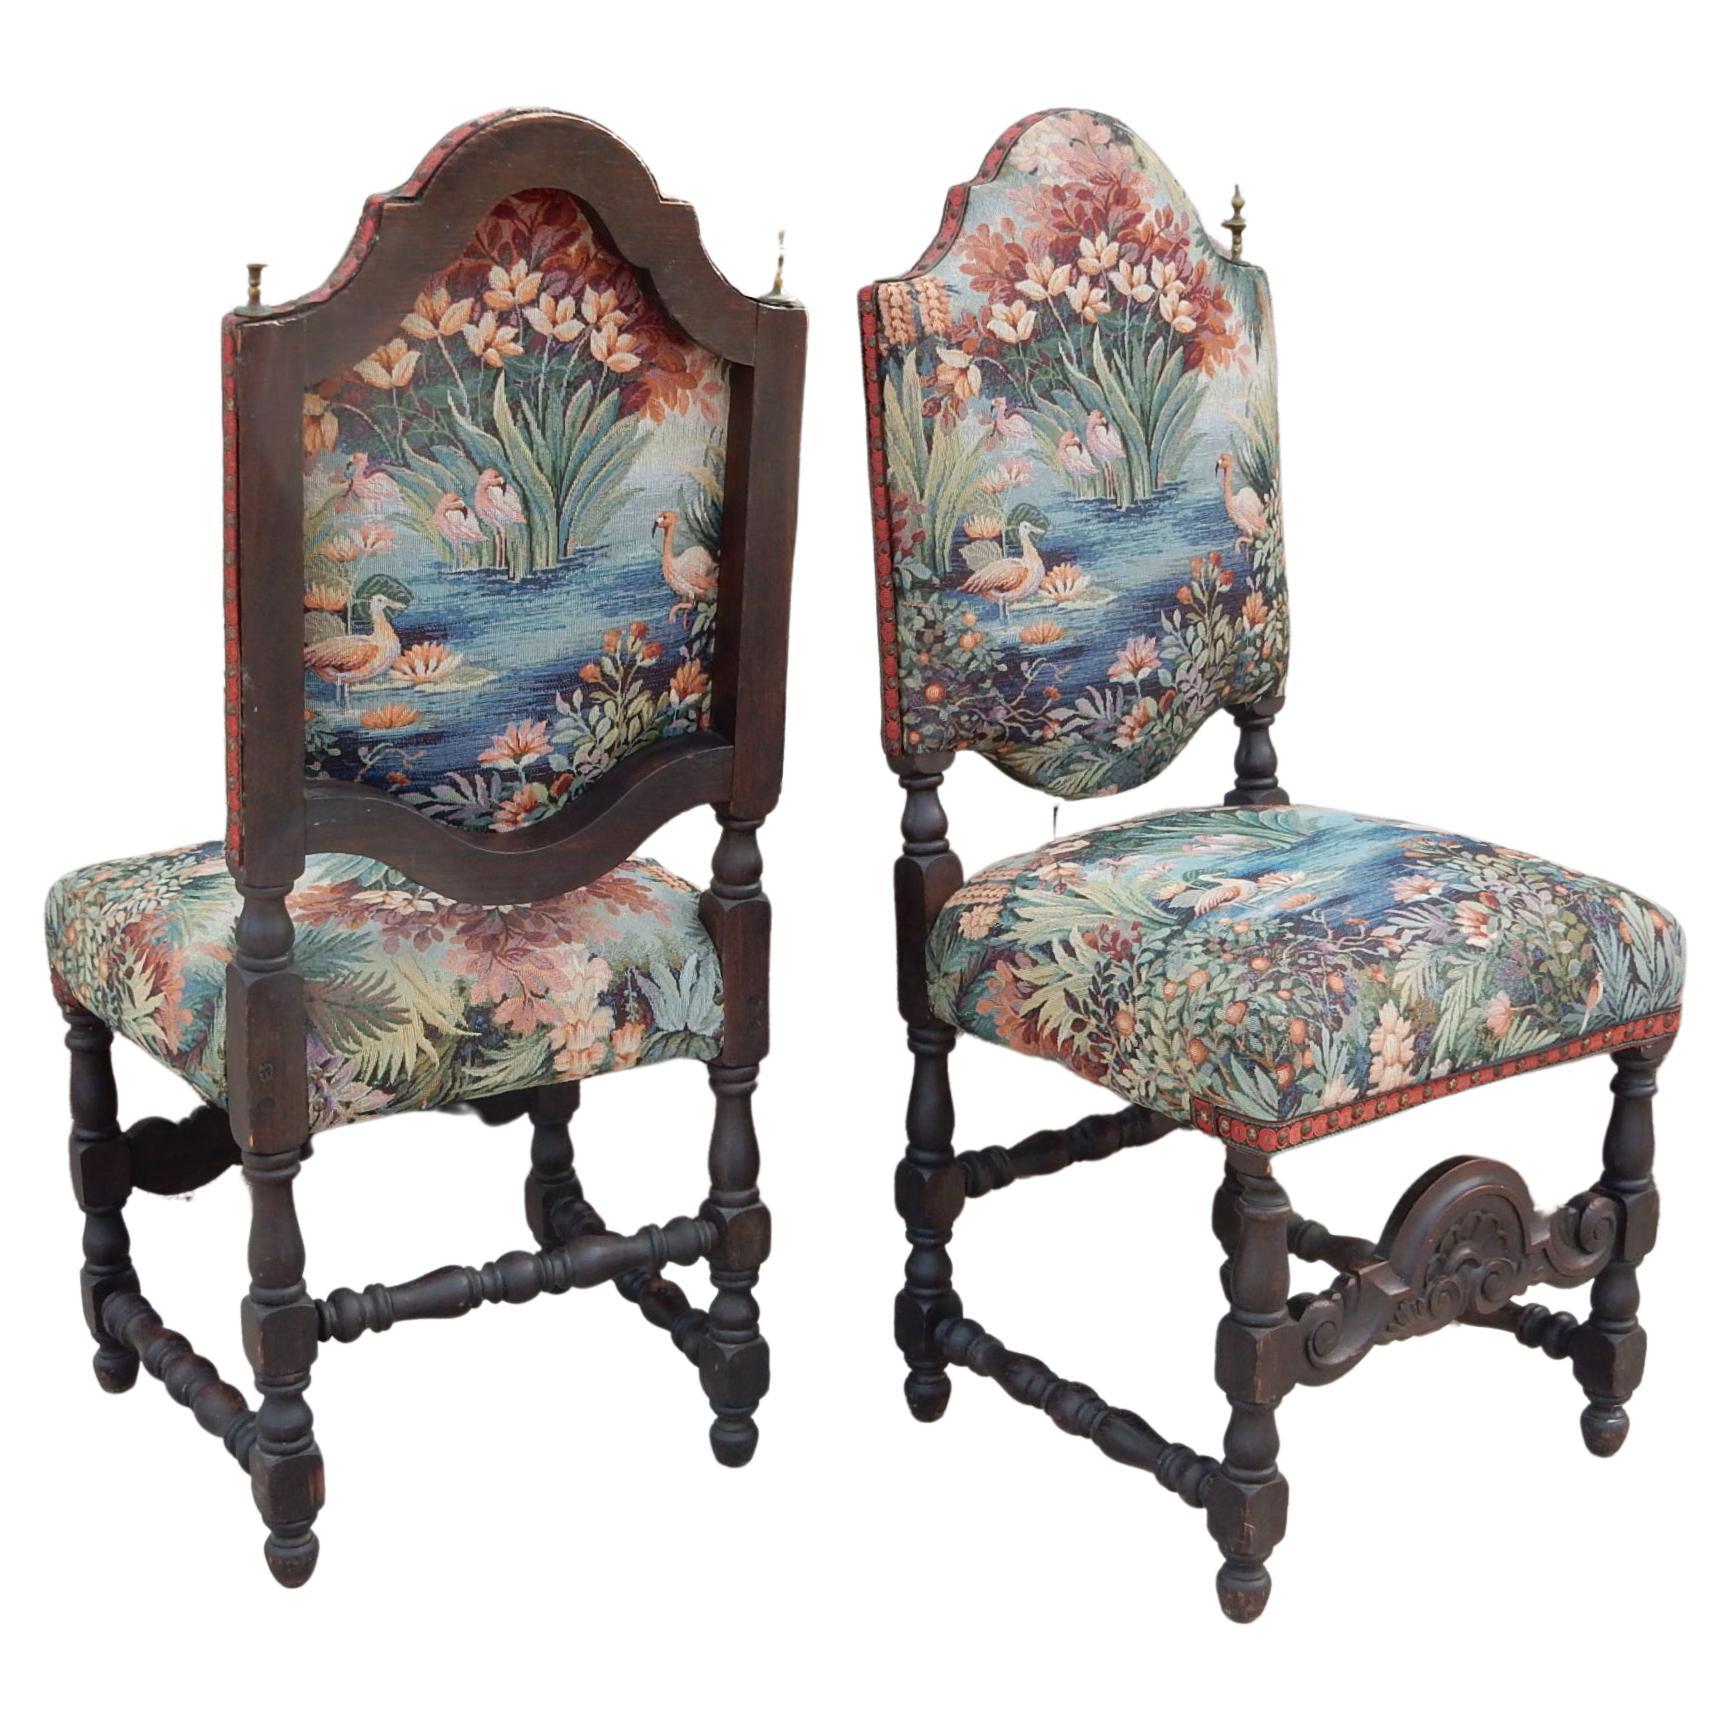 Soulful pair of Spanish Colonial Revival side chairs upholstered in
a gorgeous flamingo garden paradise upholstery. Circa 1940's frames.
Large brass finals on each side with fancy trim and nailhead edges.
Upholstery is very clean with no stains,